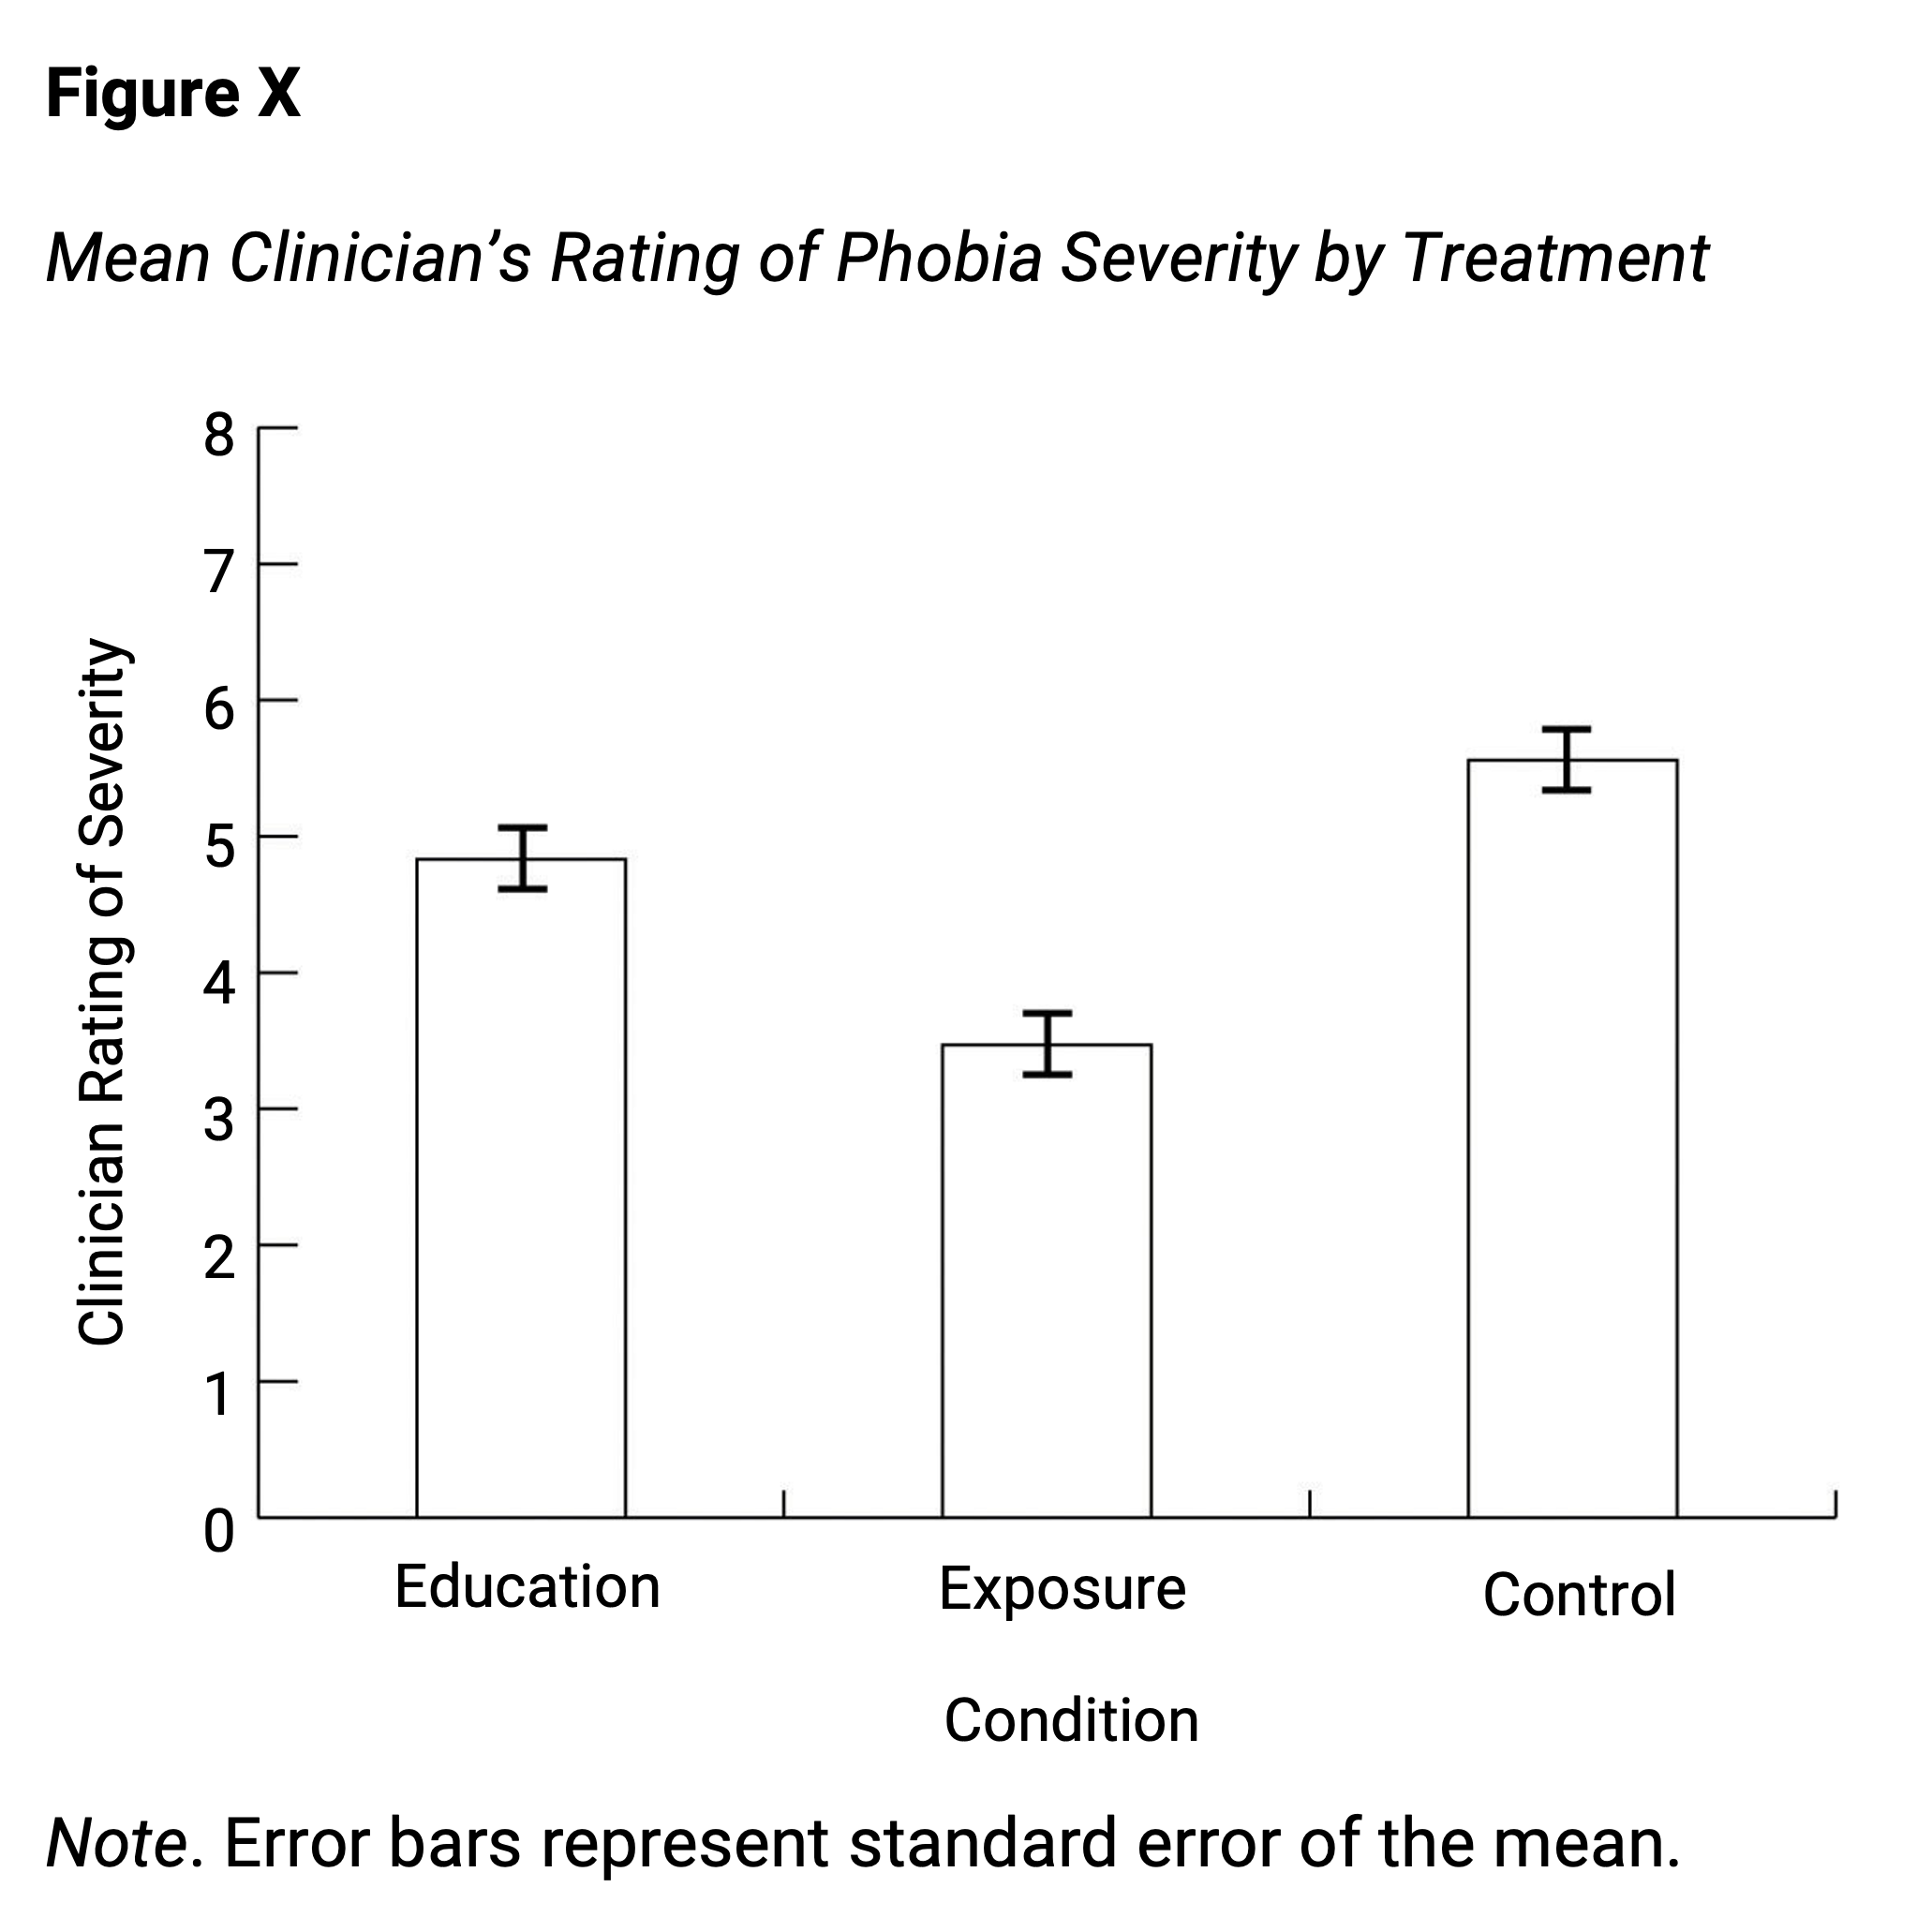 Sample APA-style bar graph, with error bars representing the standard errors, based on research by Ollendick and colleagues.